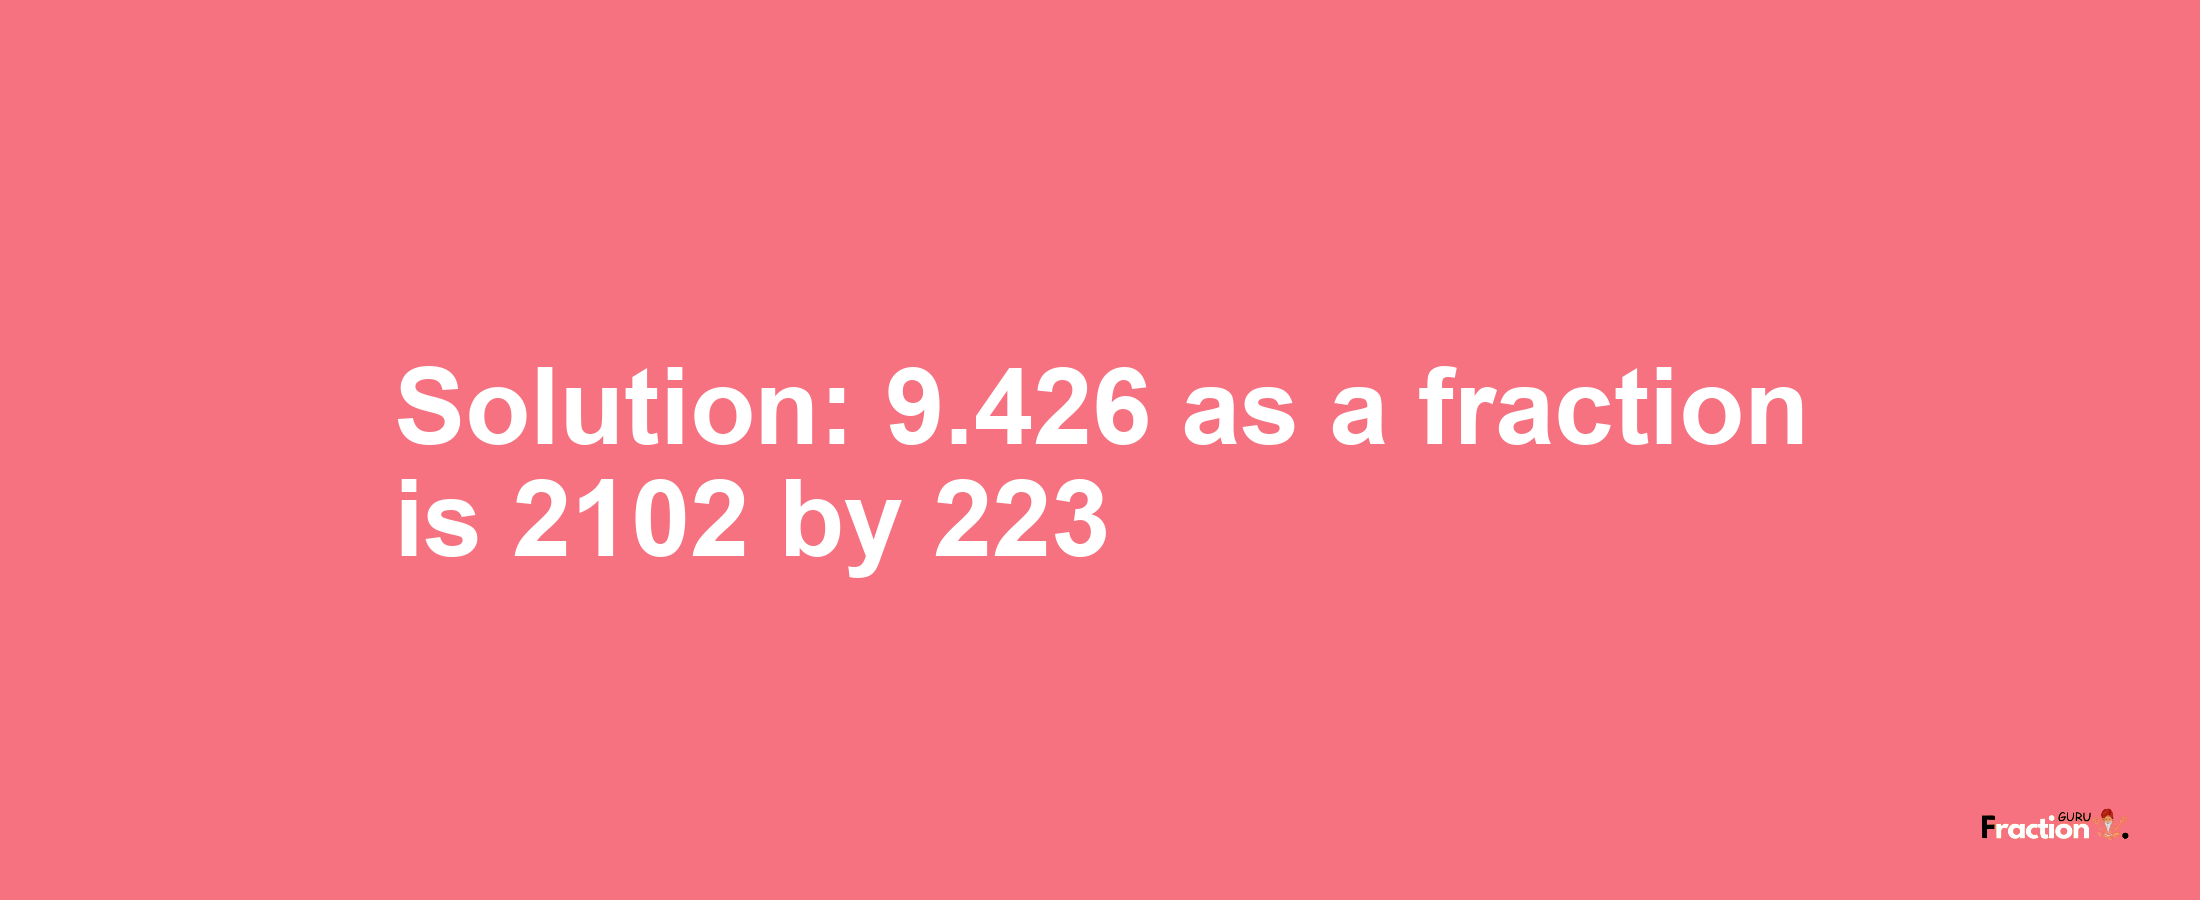 Solution:9.426 as a fraction is 2102/223